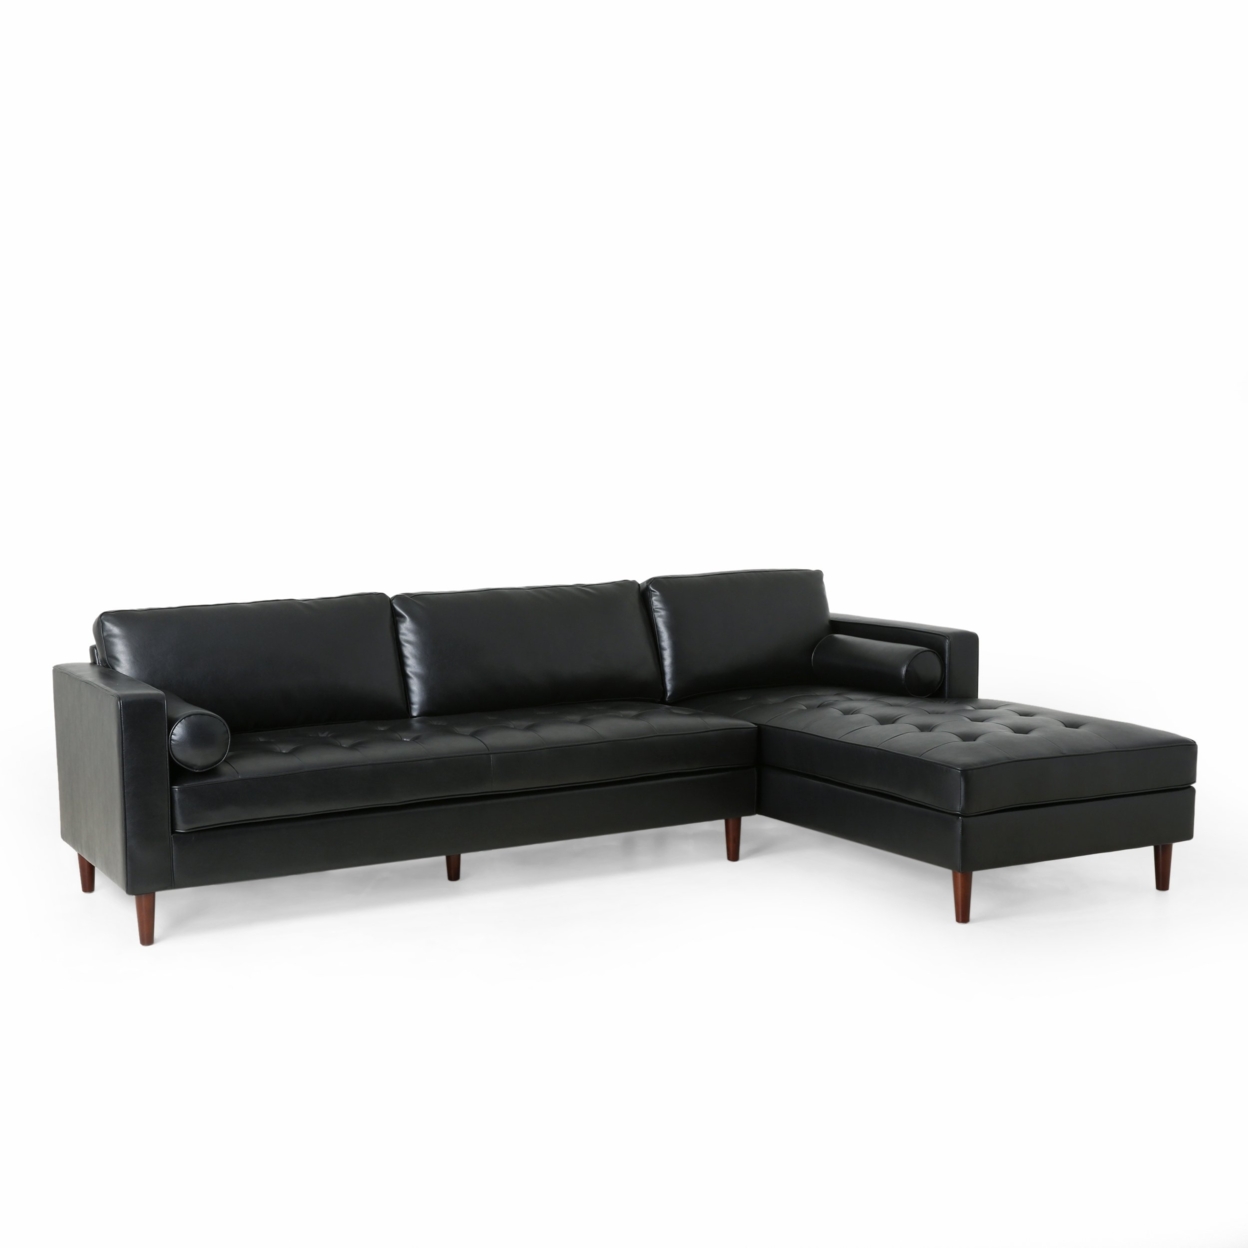 Lockbourne Contemporary Tufted Upholstered Chaise Sectional - Espresso/midnight